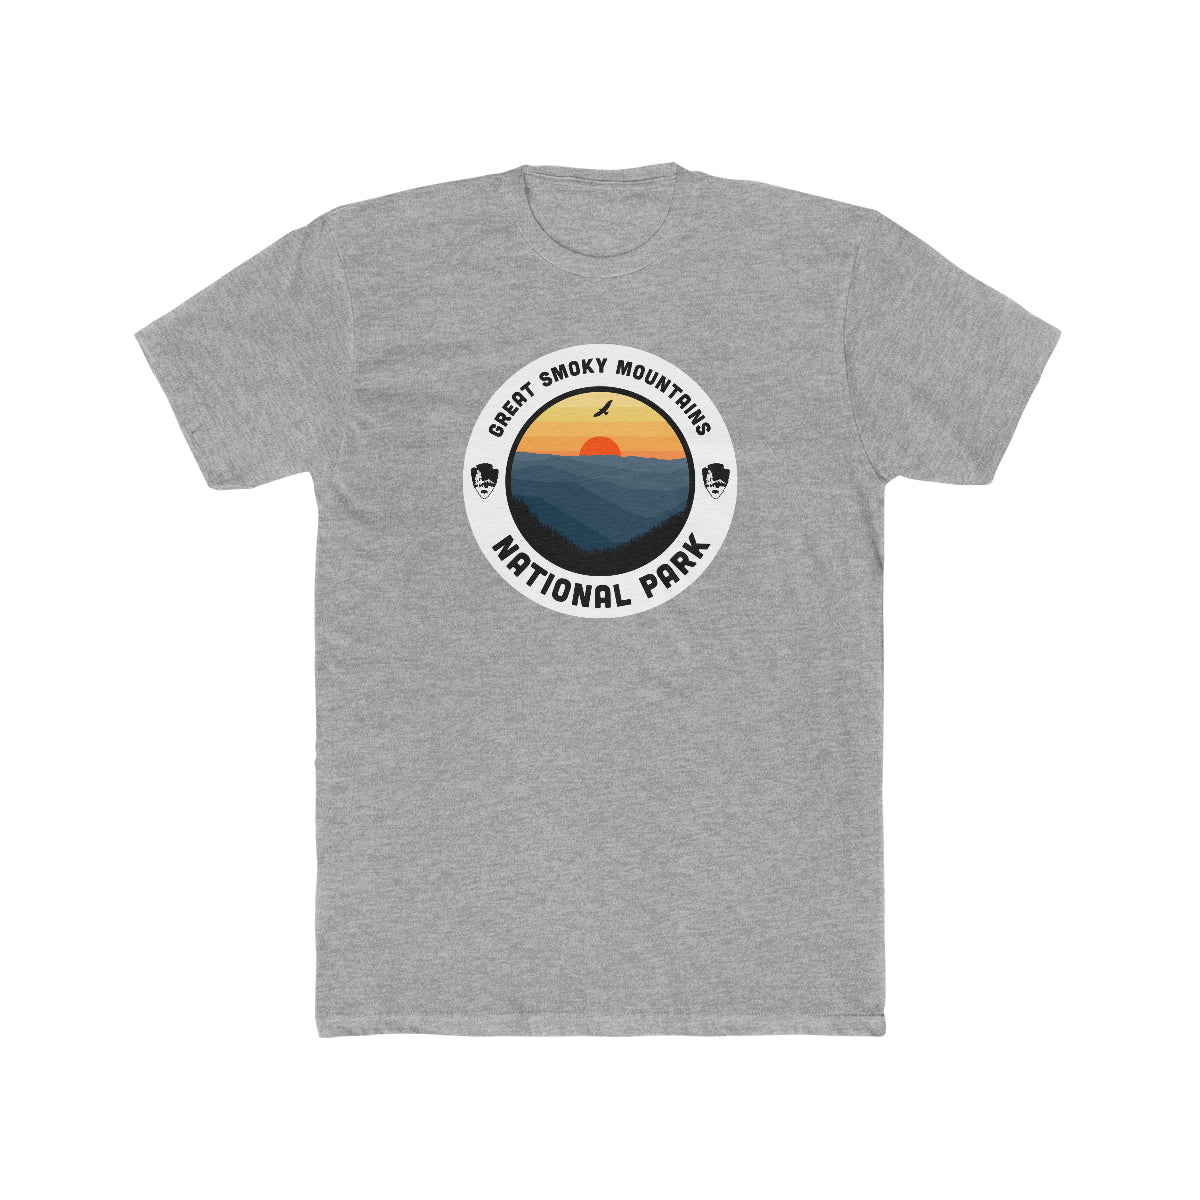 Great Smoky Mountains National Park T-Shirt - Round Badge Design